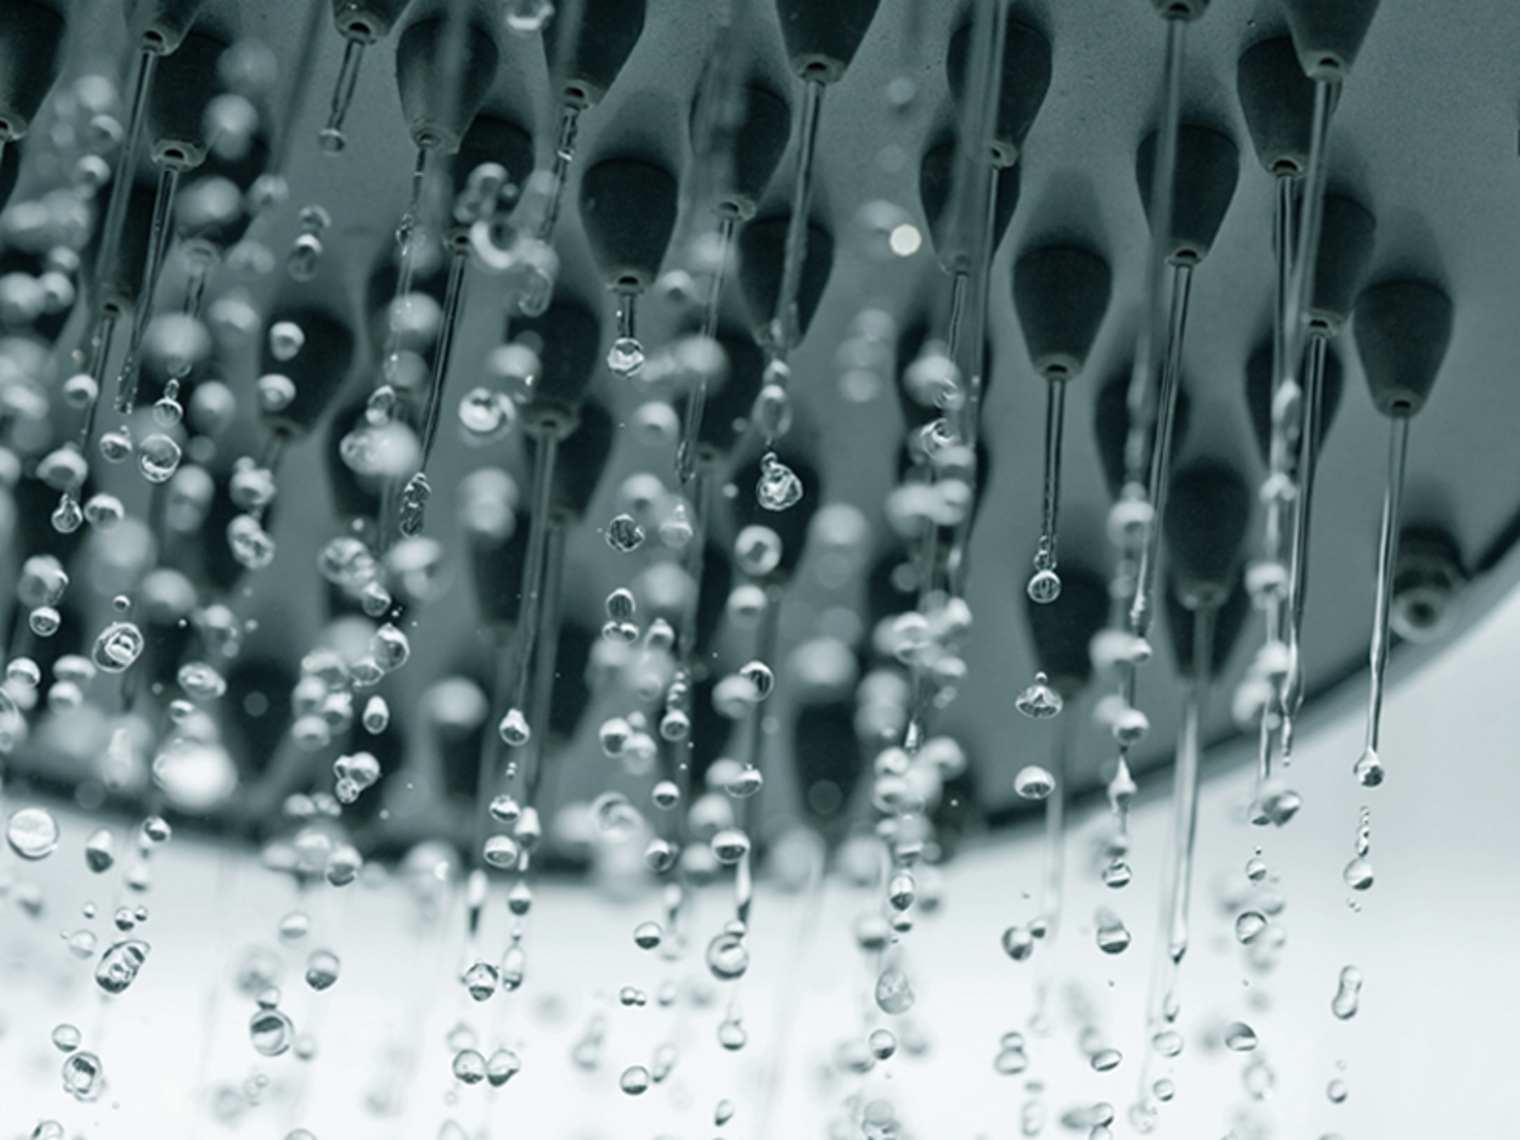 Image of a shower head spraying out water.